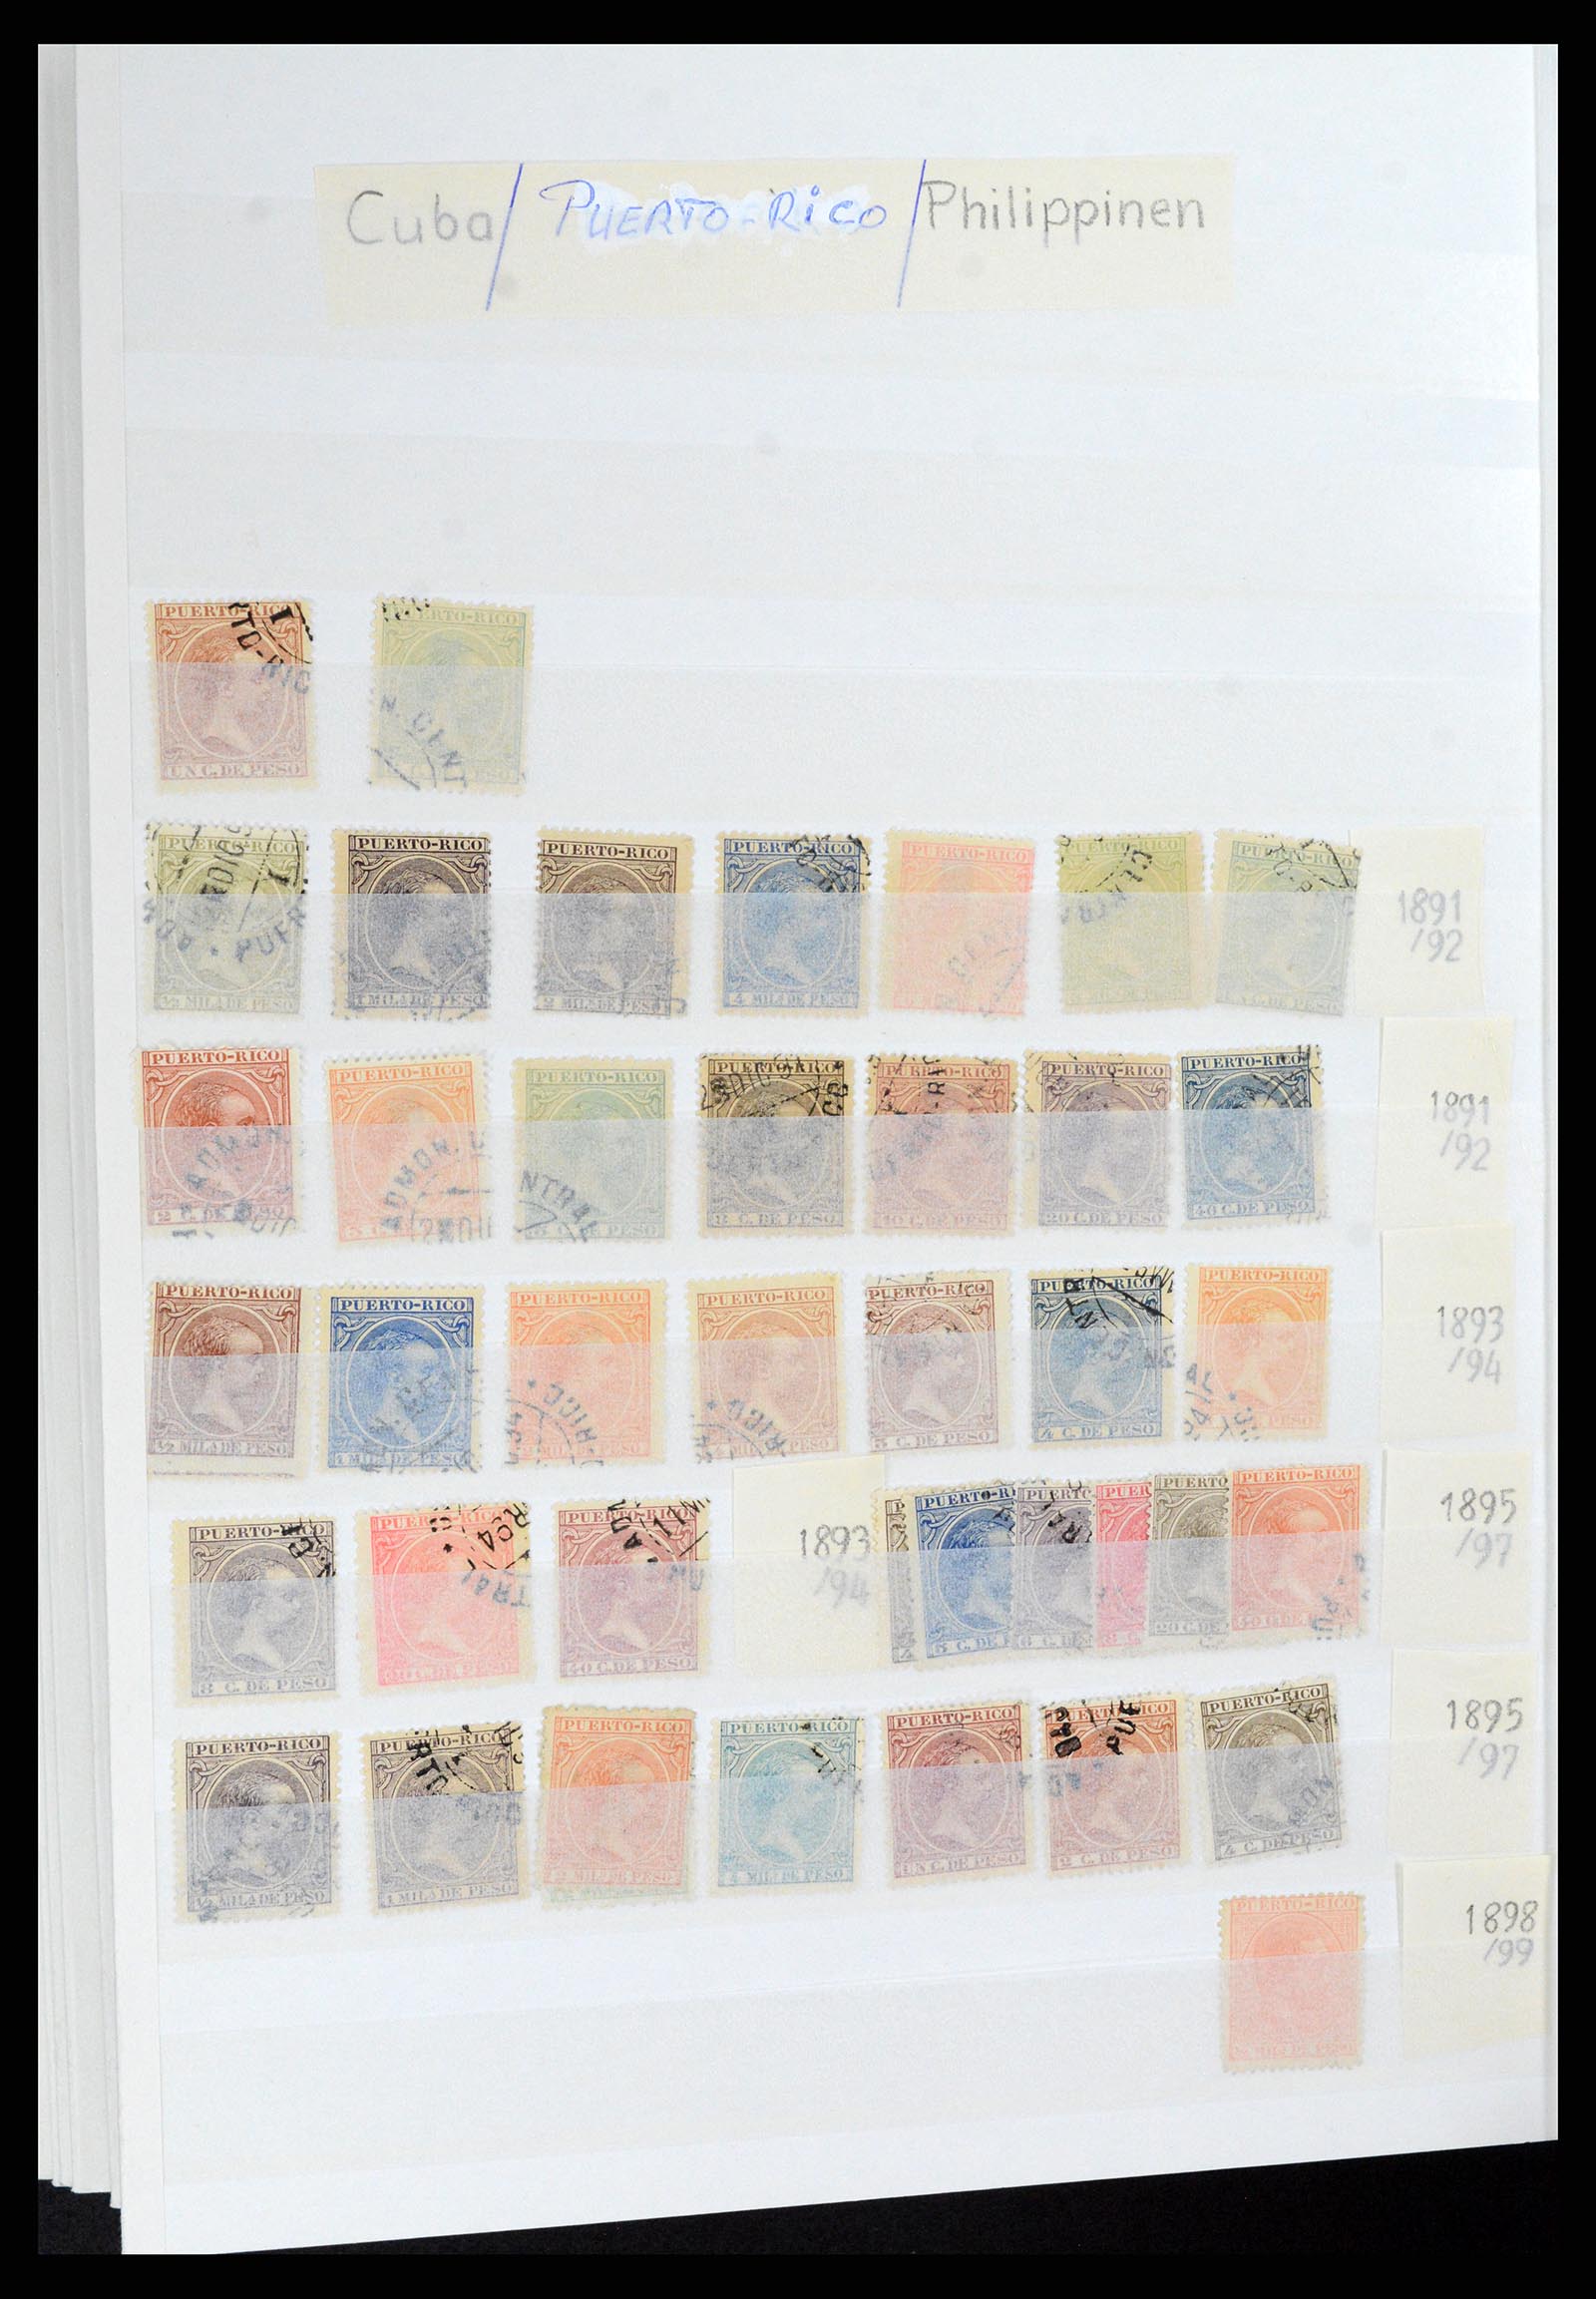 37857 050 - Stamp Collection 37857 Spanish colonies and civil war 1890-1960.